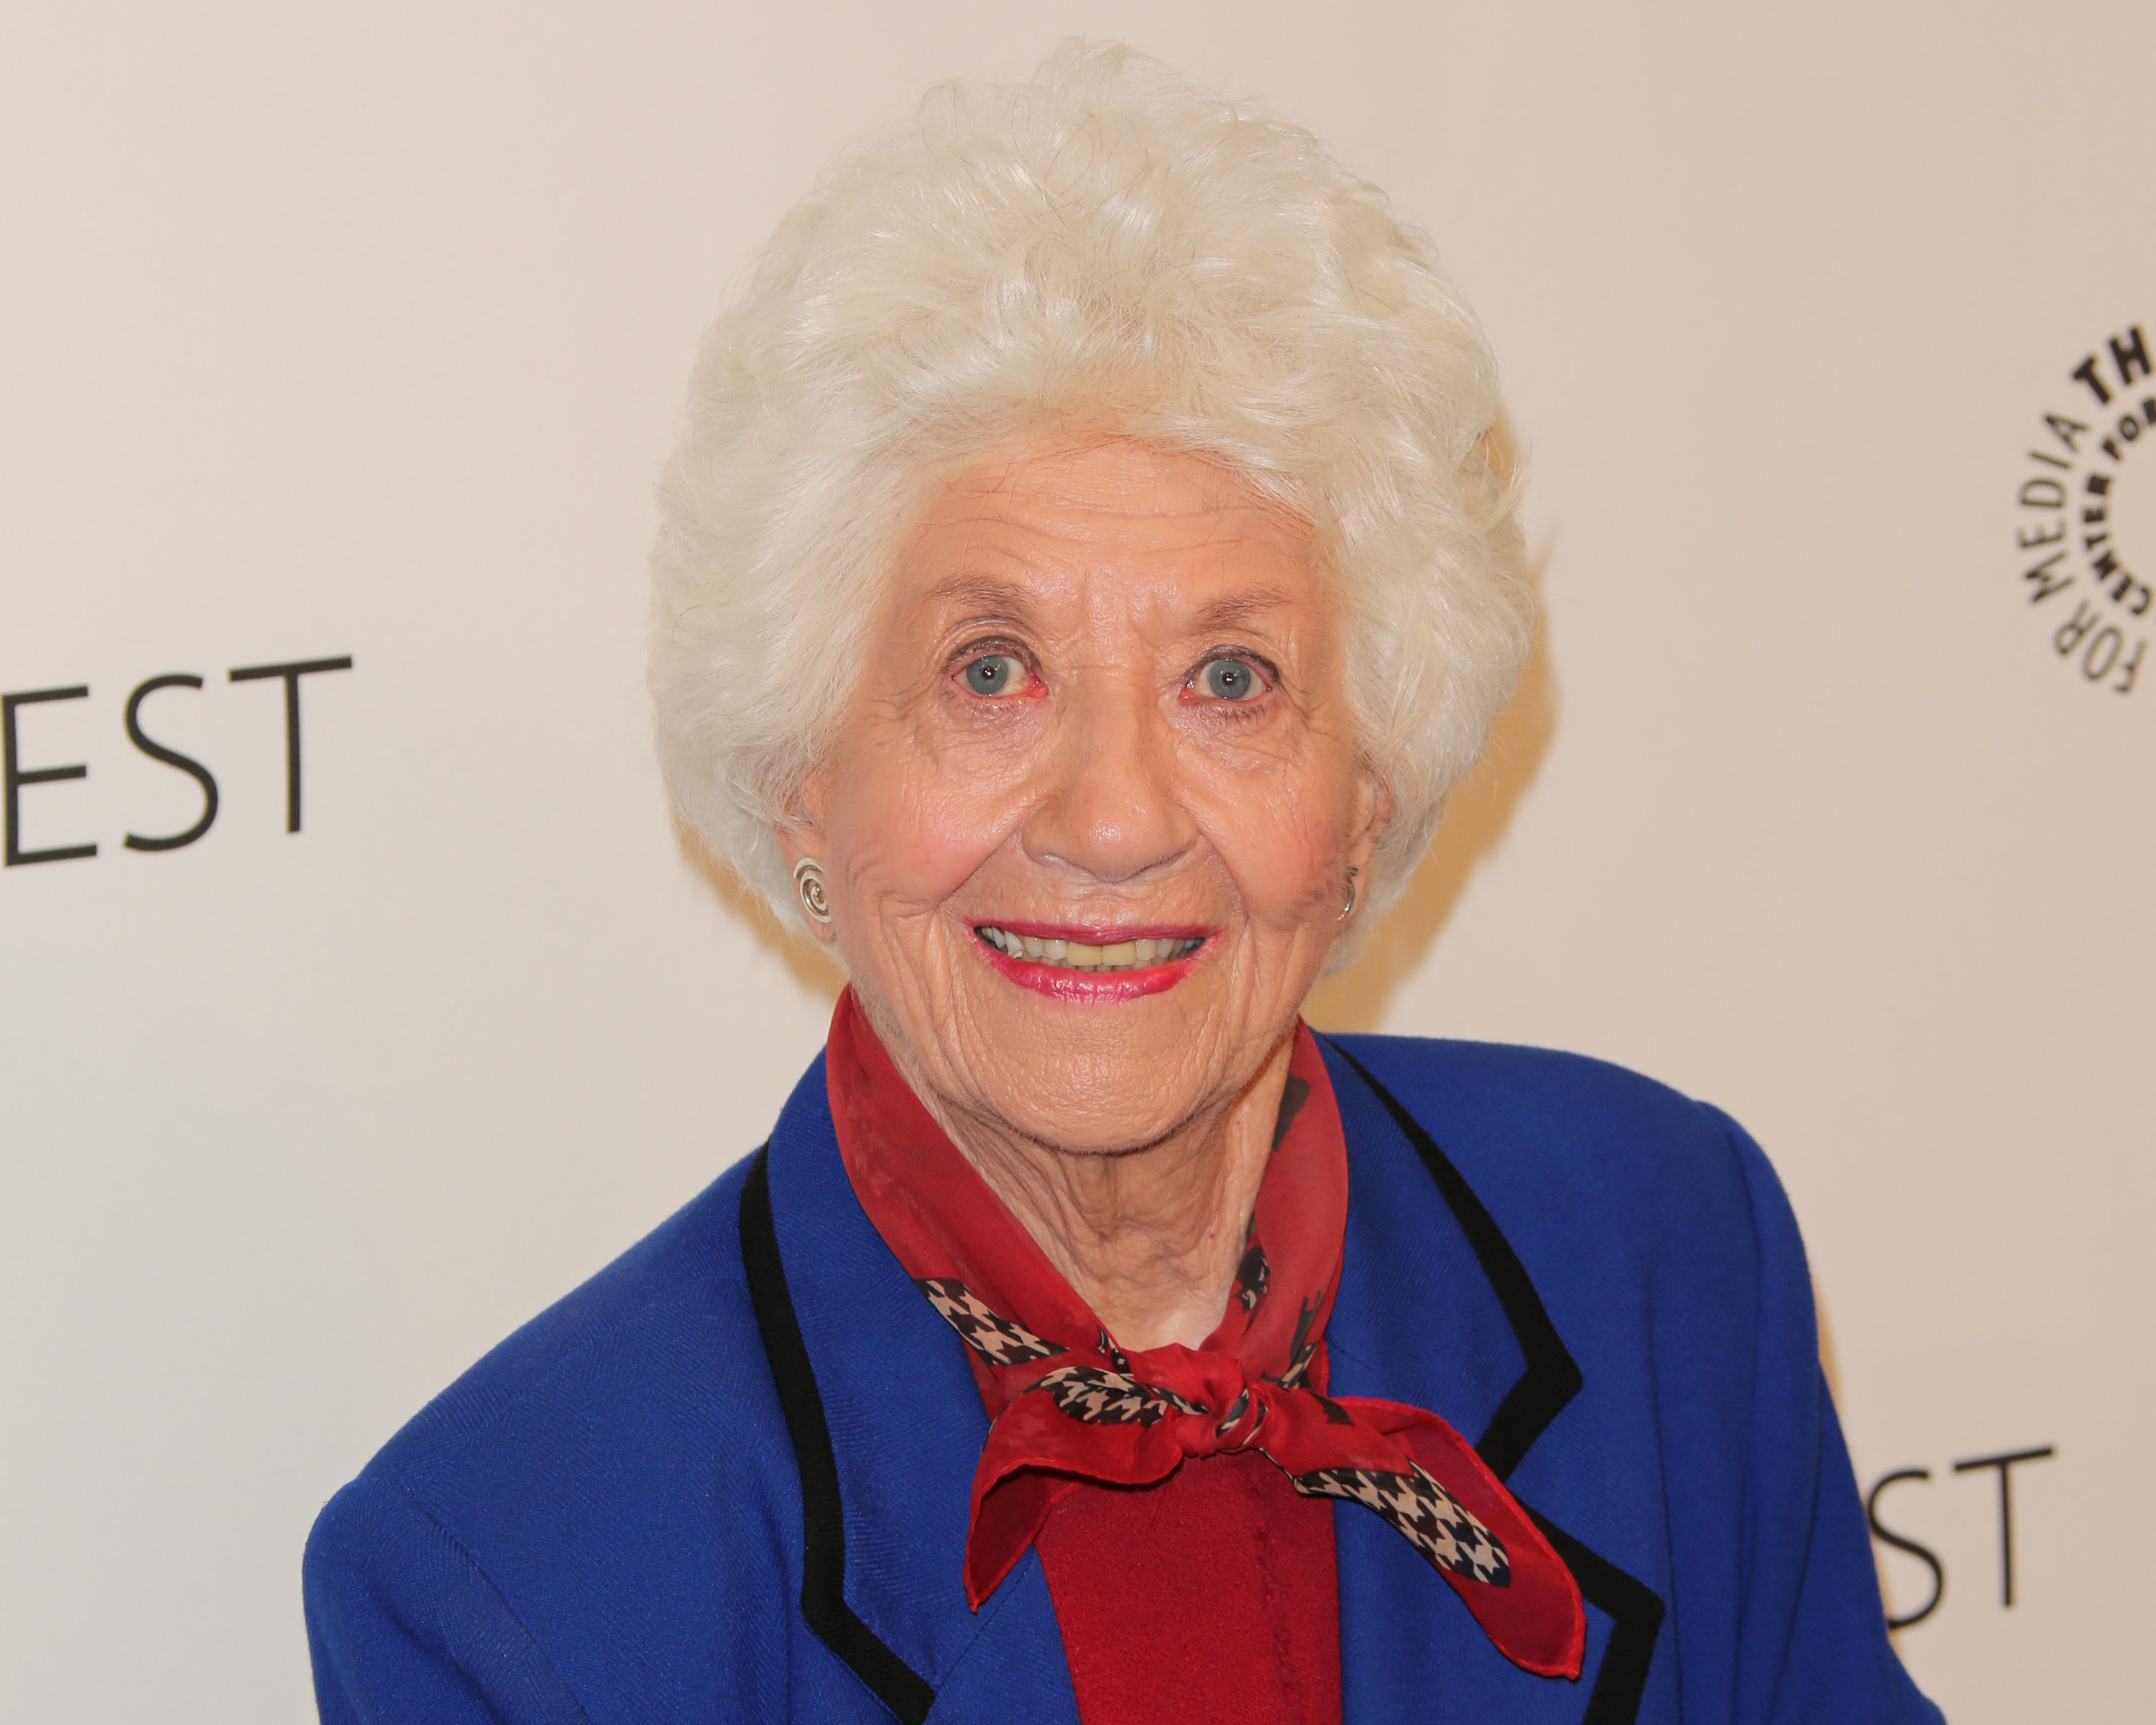 Actress Charlotte Rae attends the 2014 PaleyFest Fall TV preview of "The Facts Of Life" 35th anniversary reunion at The Paley Center for Media on September 15, 2014. | Source: Getty Images